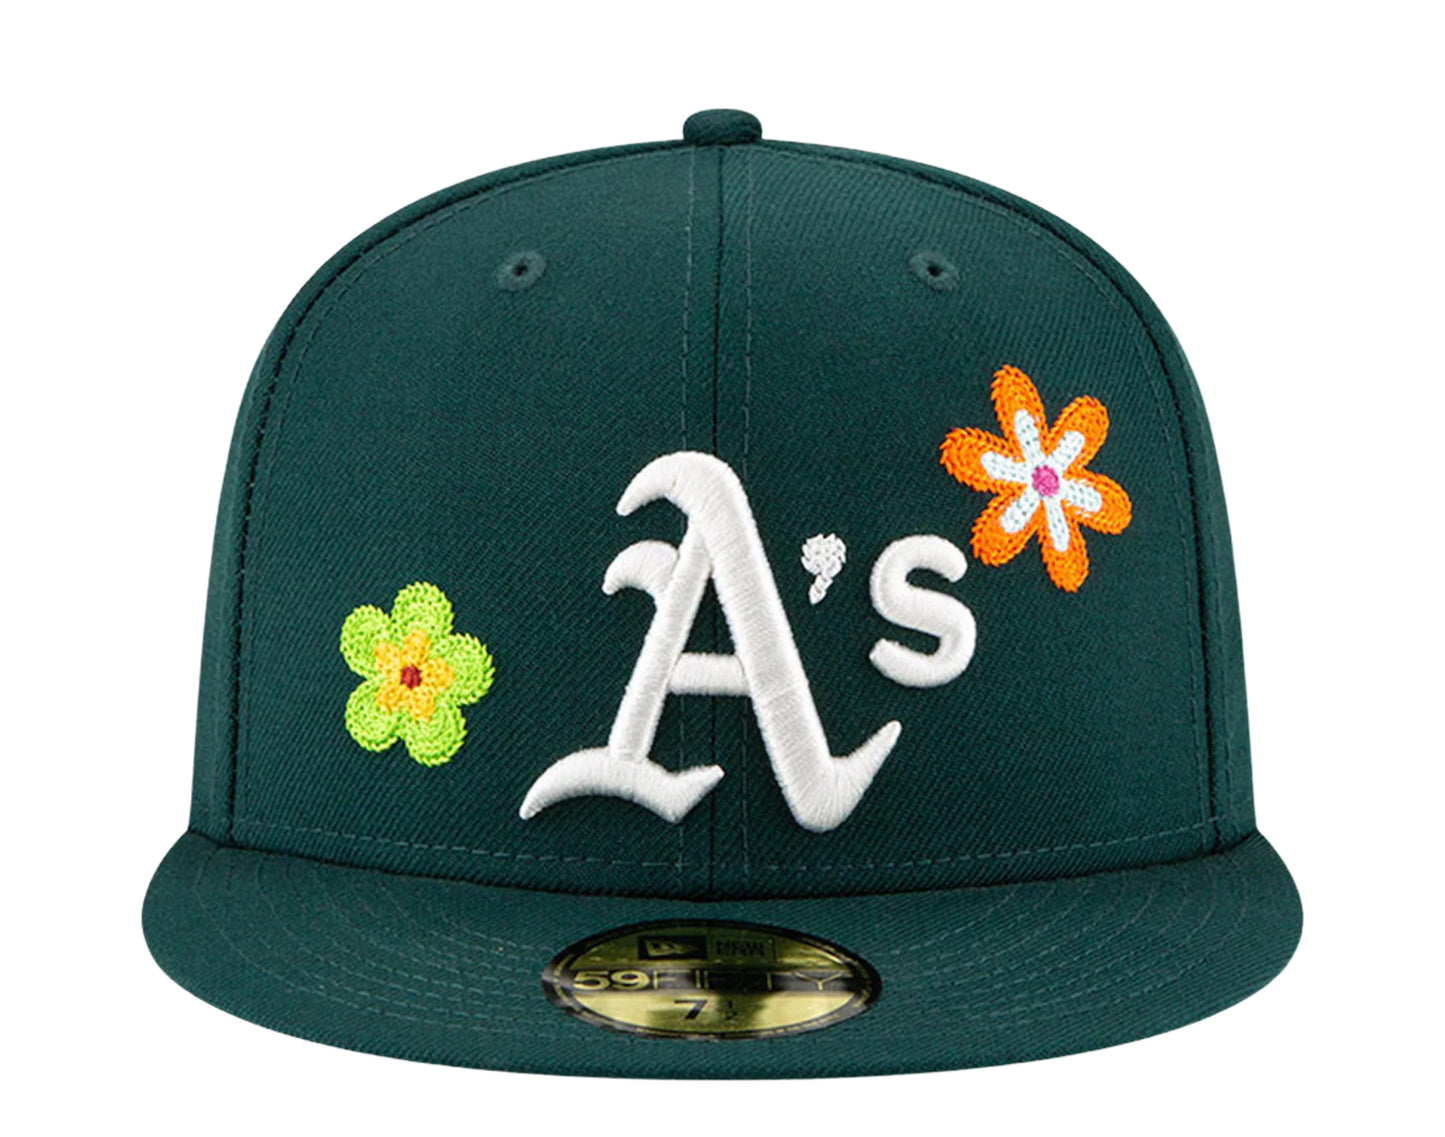 New Era 59Fifty MLB Oakland Athletics Chain Stitch Floral Fitted Hat W/ Pink Undervisor